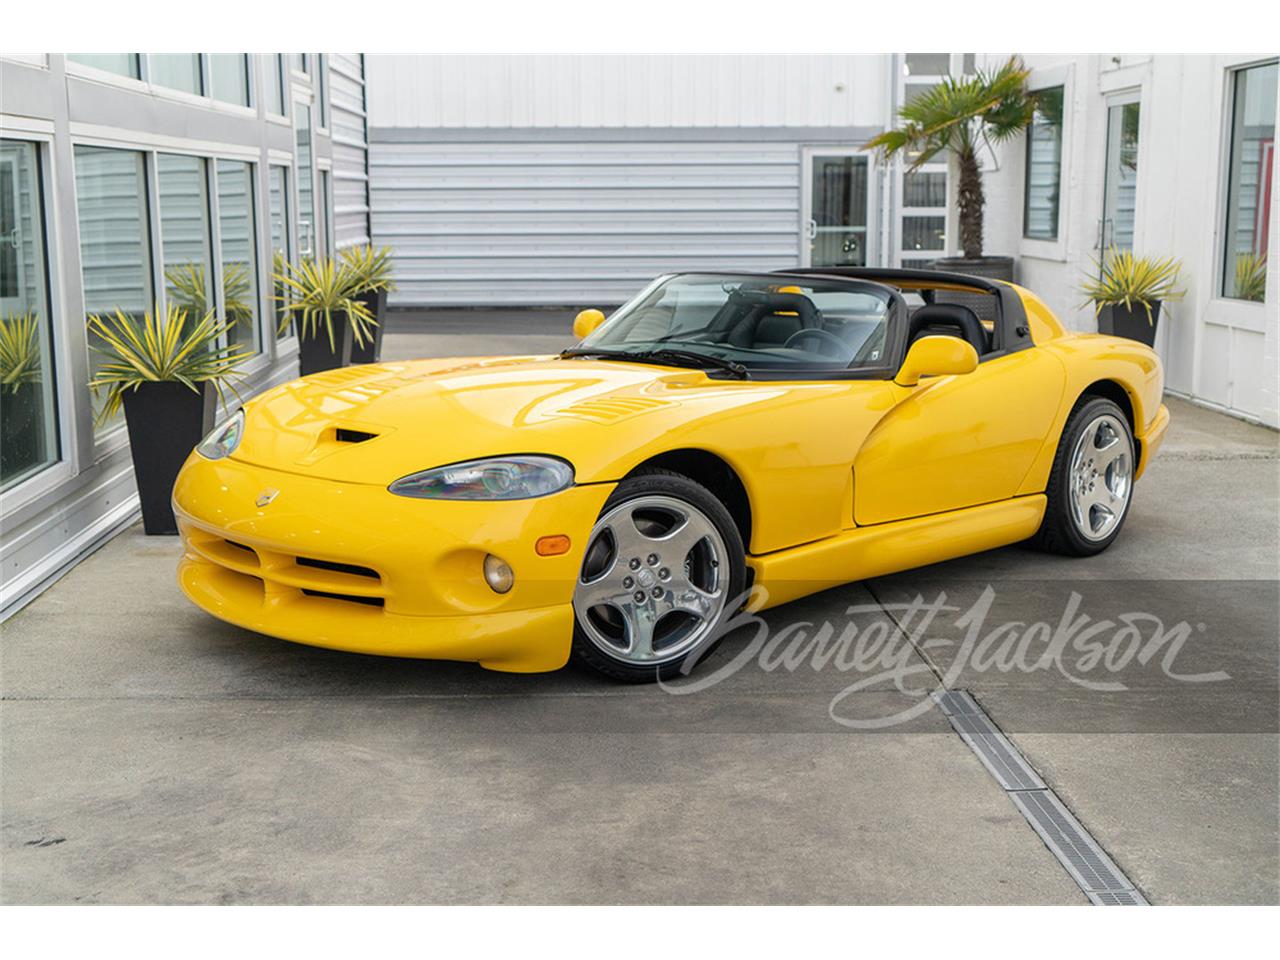 For Sale at Auction: 2002 Dodge Viper in Scottsdale, Arizona for sale in Scottsdale, AZ